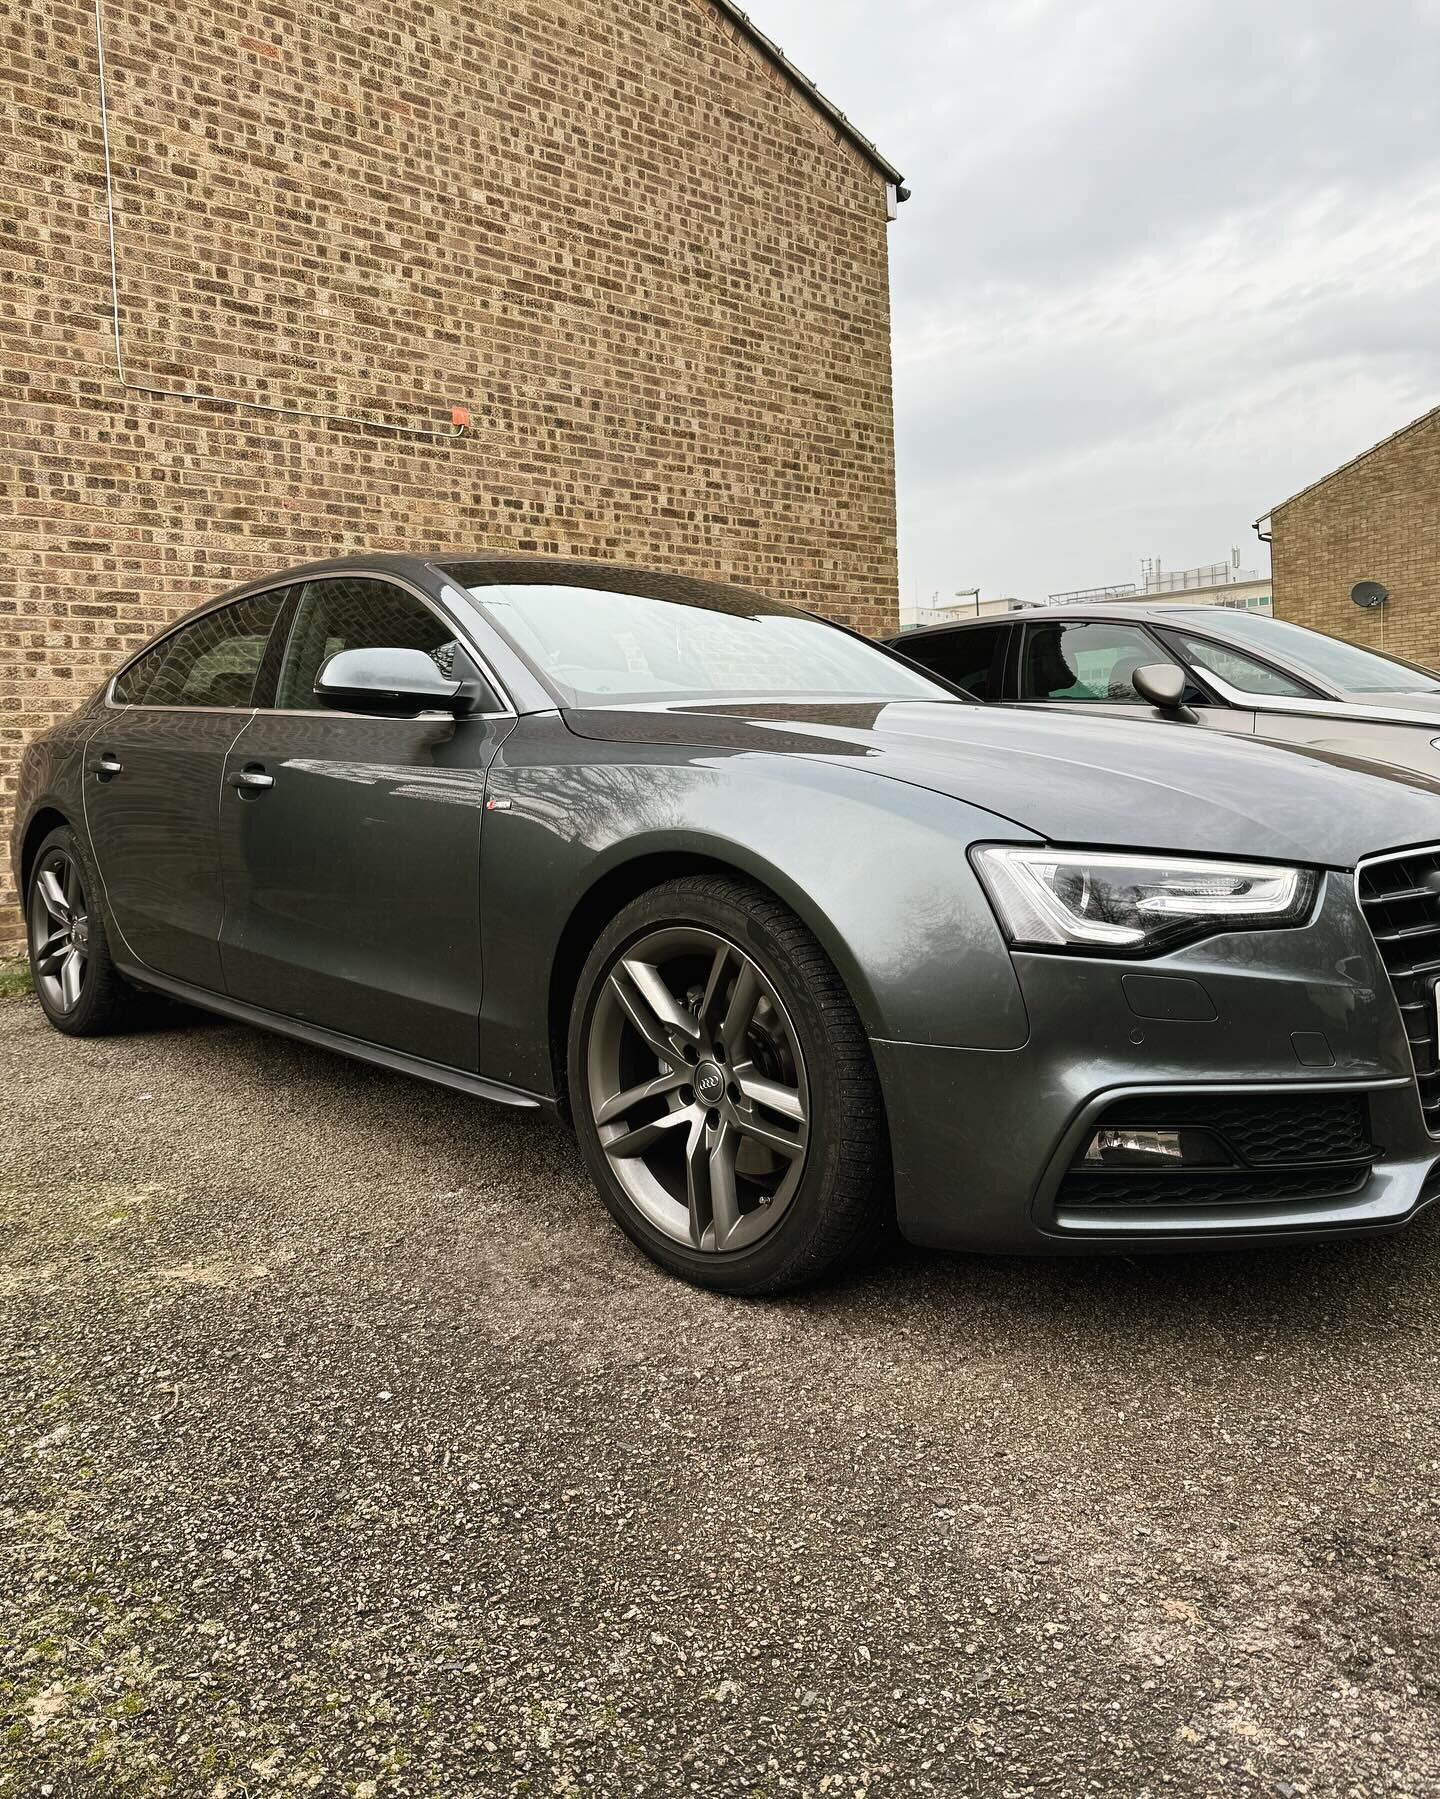 Audi A5 (8F) - 2.0 TDI CR

Stage 1 Performance Remap

📈 177 bhp ➡️ 210 bhp 📈
📈 380 nm ➡️ 430 nm 📈
__________________________________________
💻 Custom Software
📈 Performance
🌿 Economy
💥 Pops &amp; Bangs / Hardcut
⚙ Gearbox Tuning
🚘 Mobile Ser